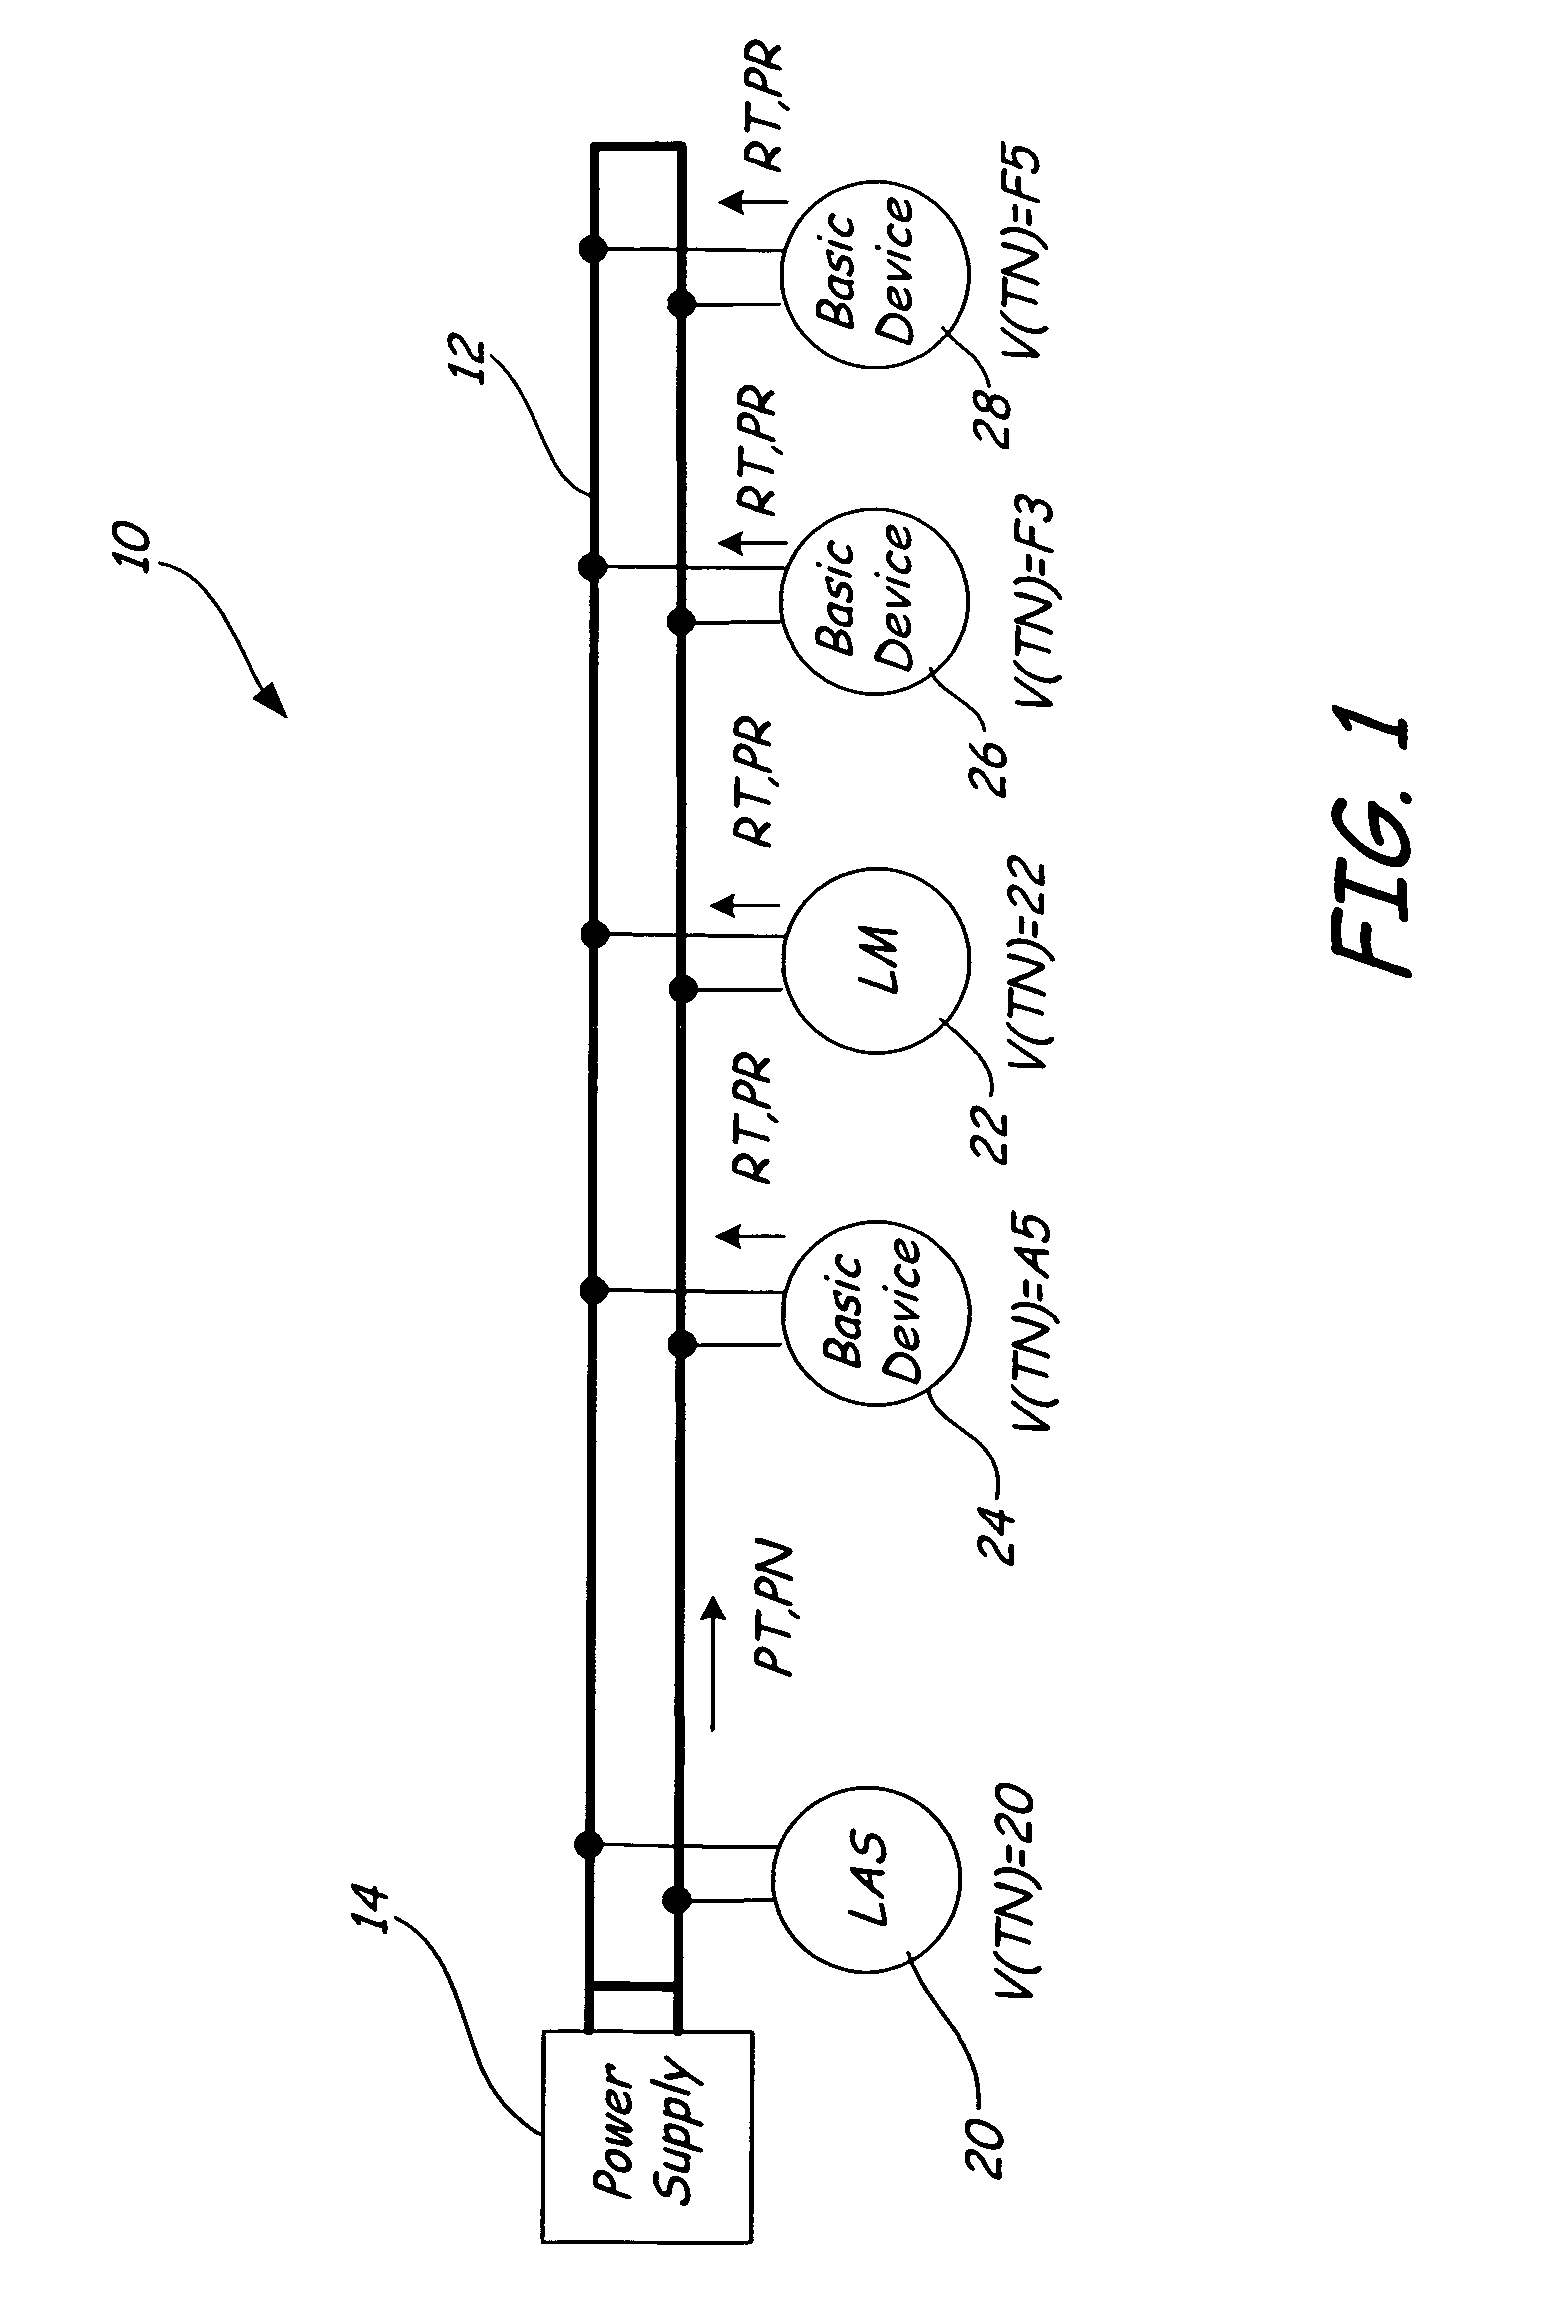 Communication controller with automatic time stamping